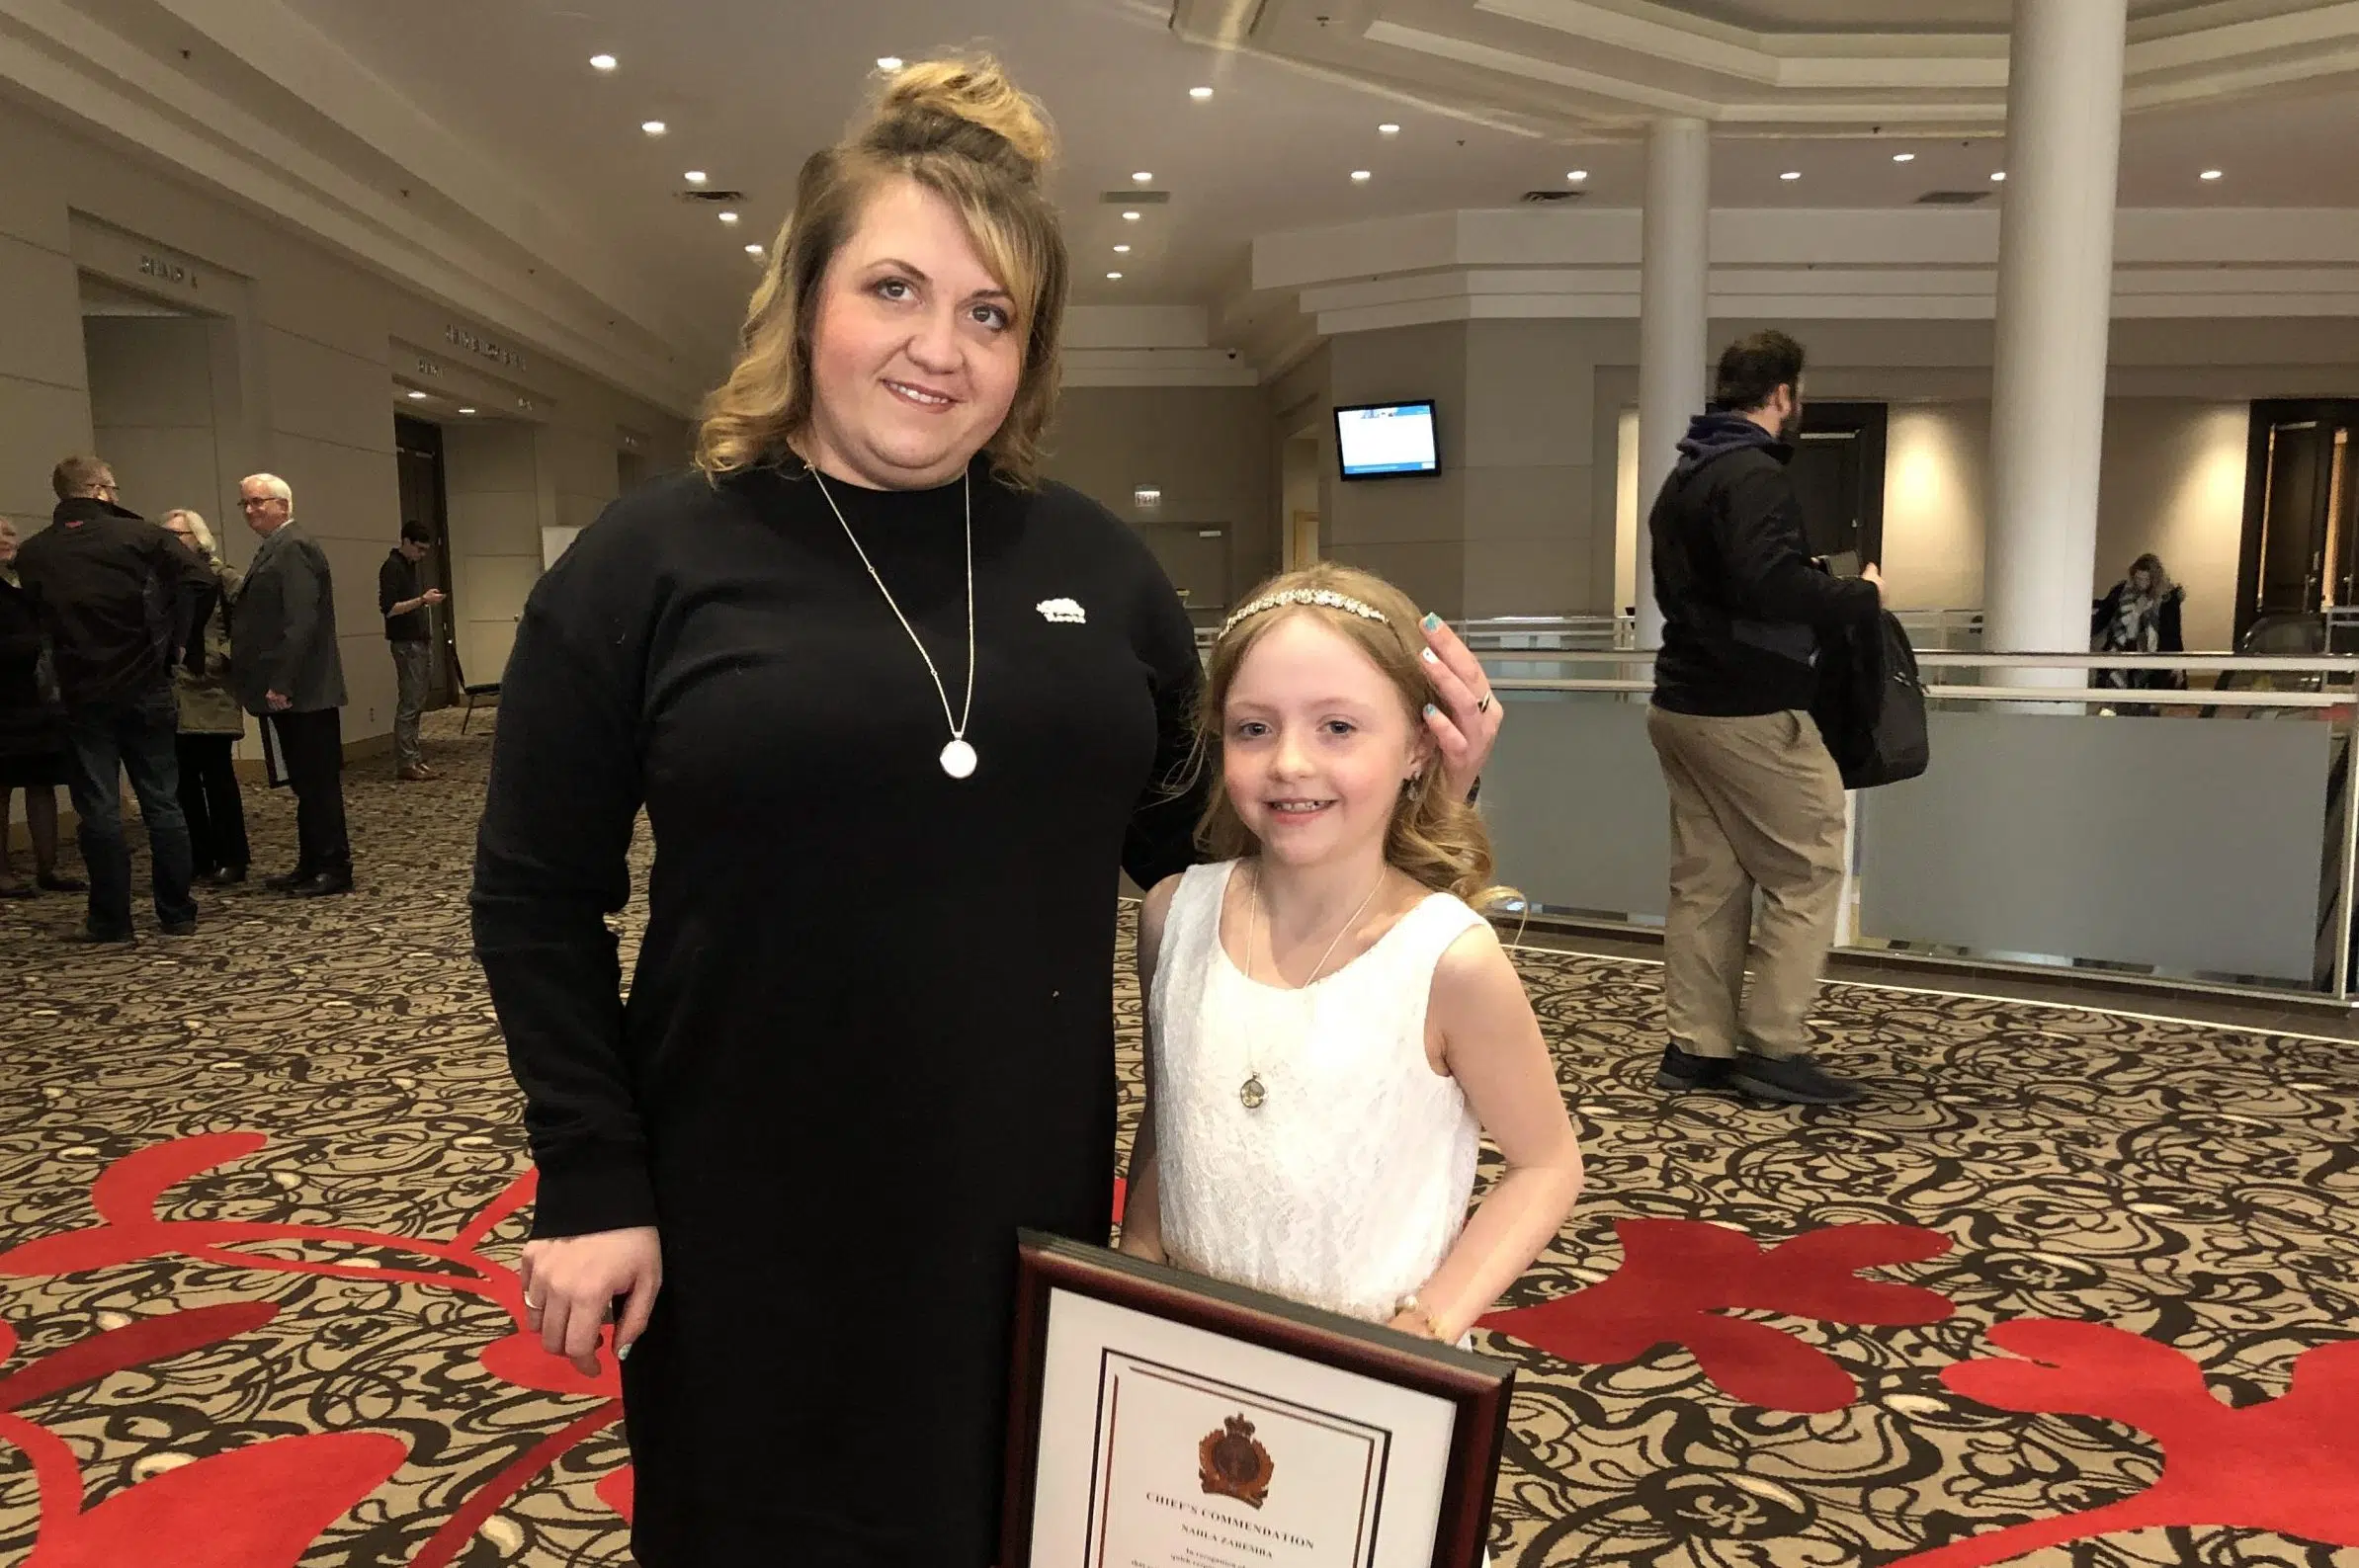 Regina girl receives award for quick thinking during fire